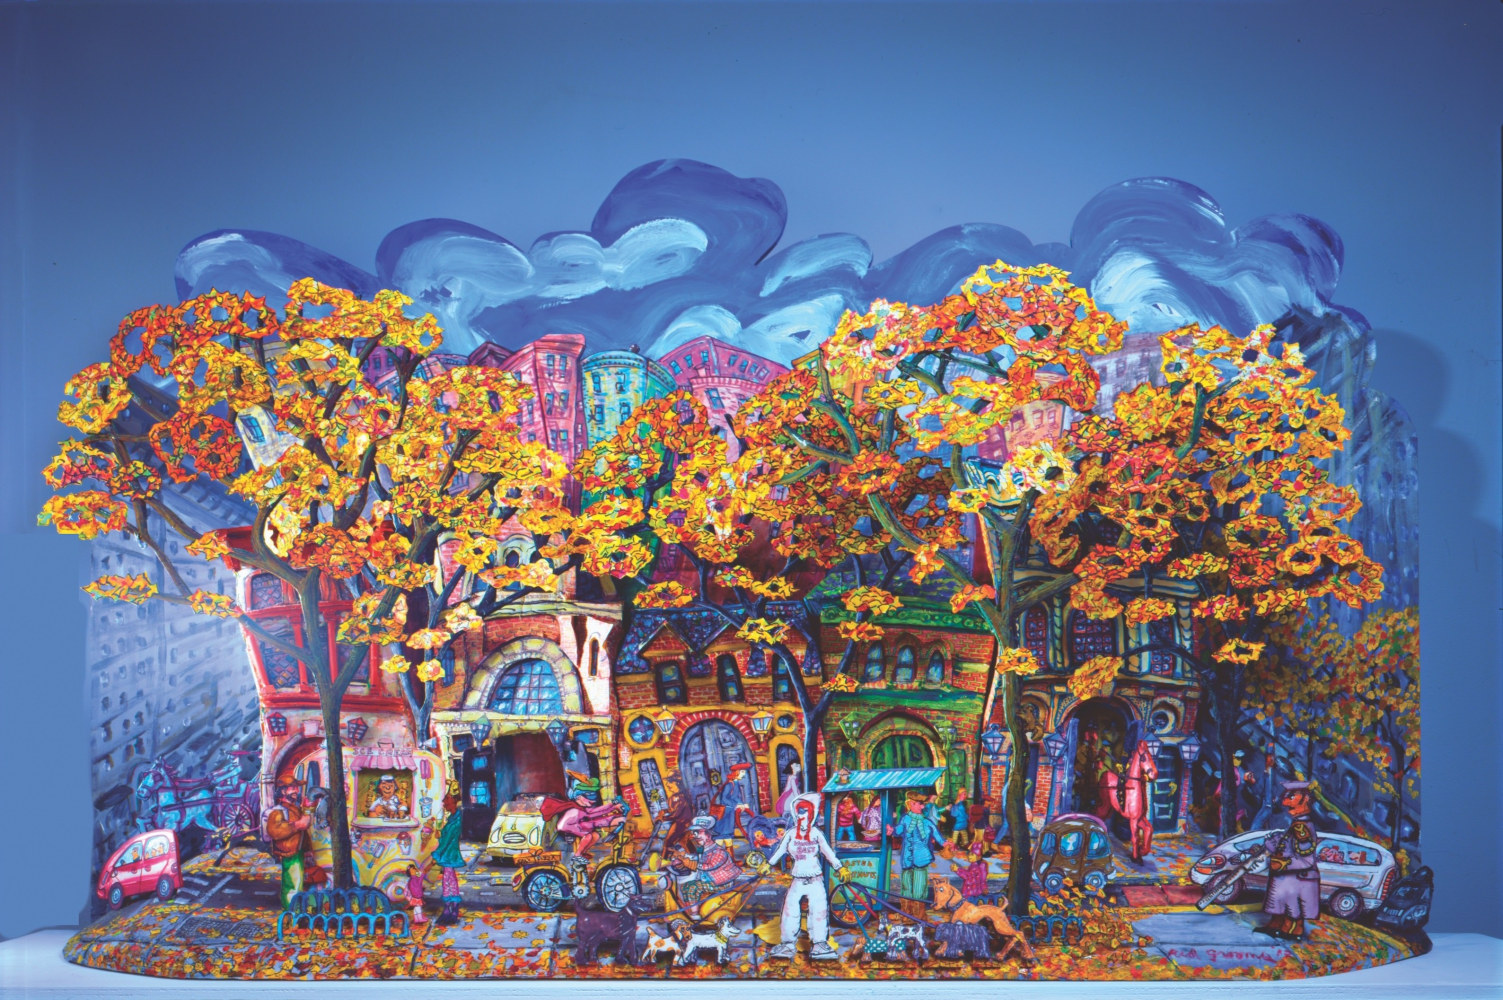 Red Grooms artwork depicting a colorful street view of New York City in autumn using exaggerated perspective.